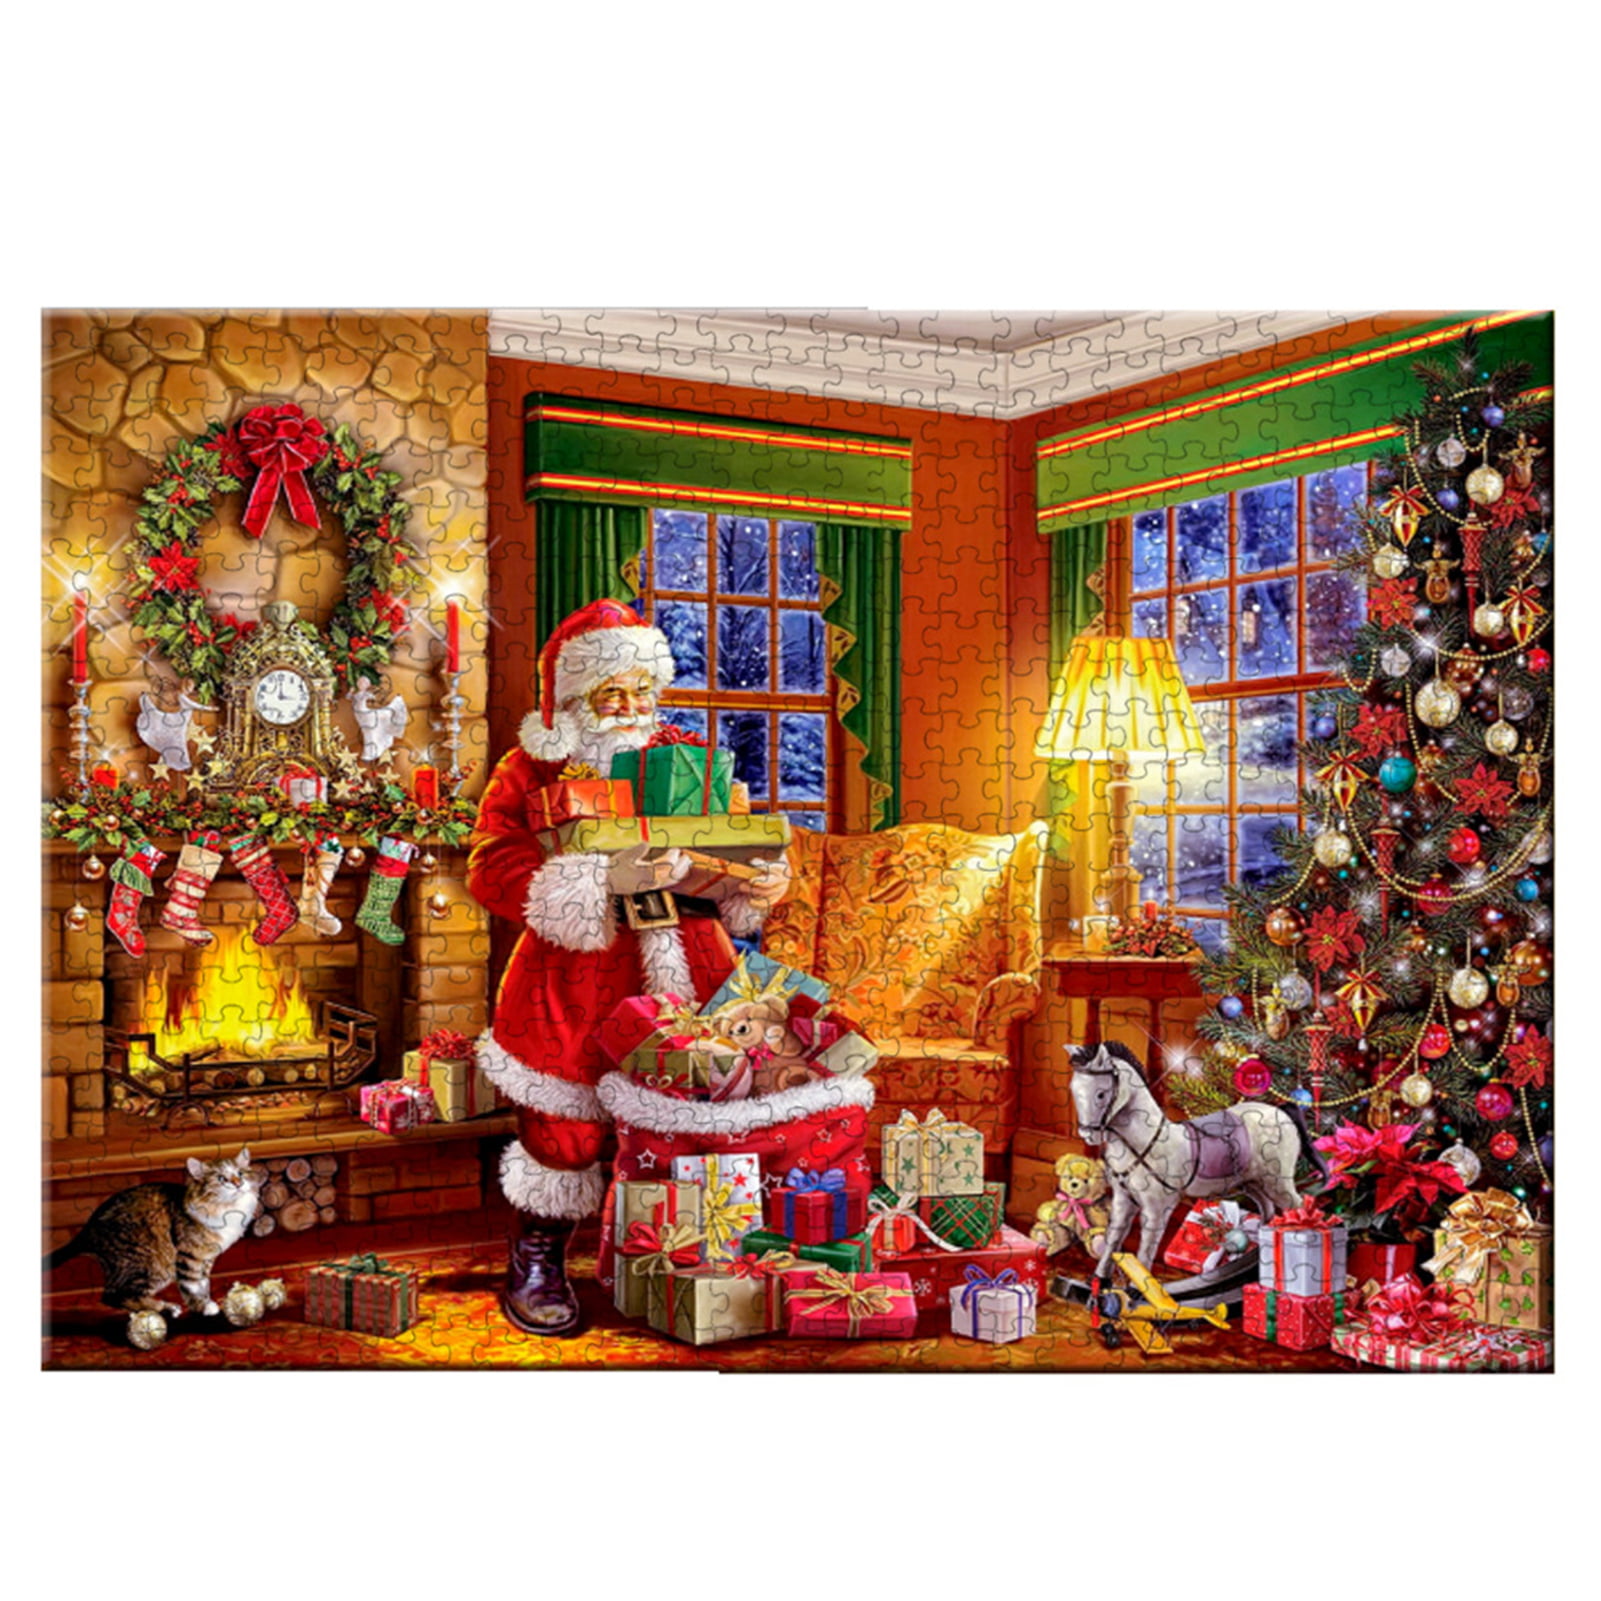 Puzzle Merry Christmas Large Jigsaw 1000 Piece Educational For Kids Adults Gift 